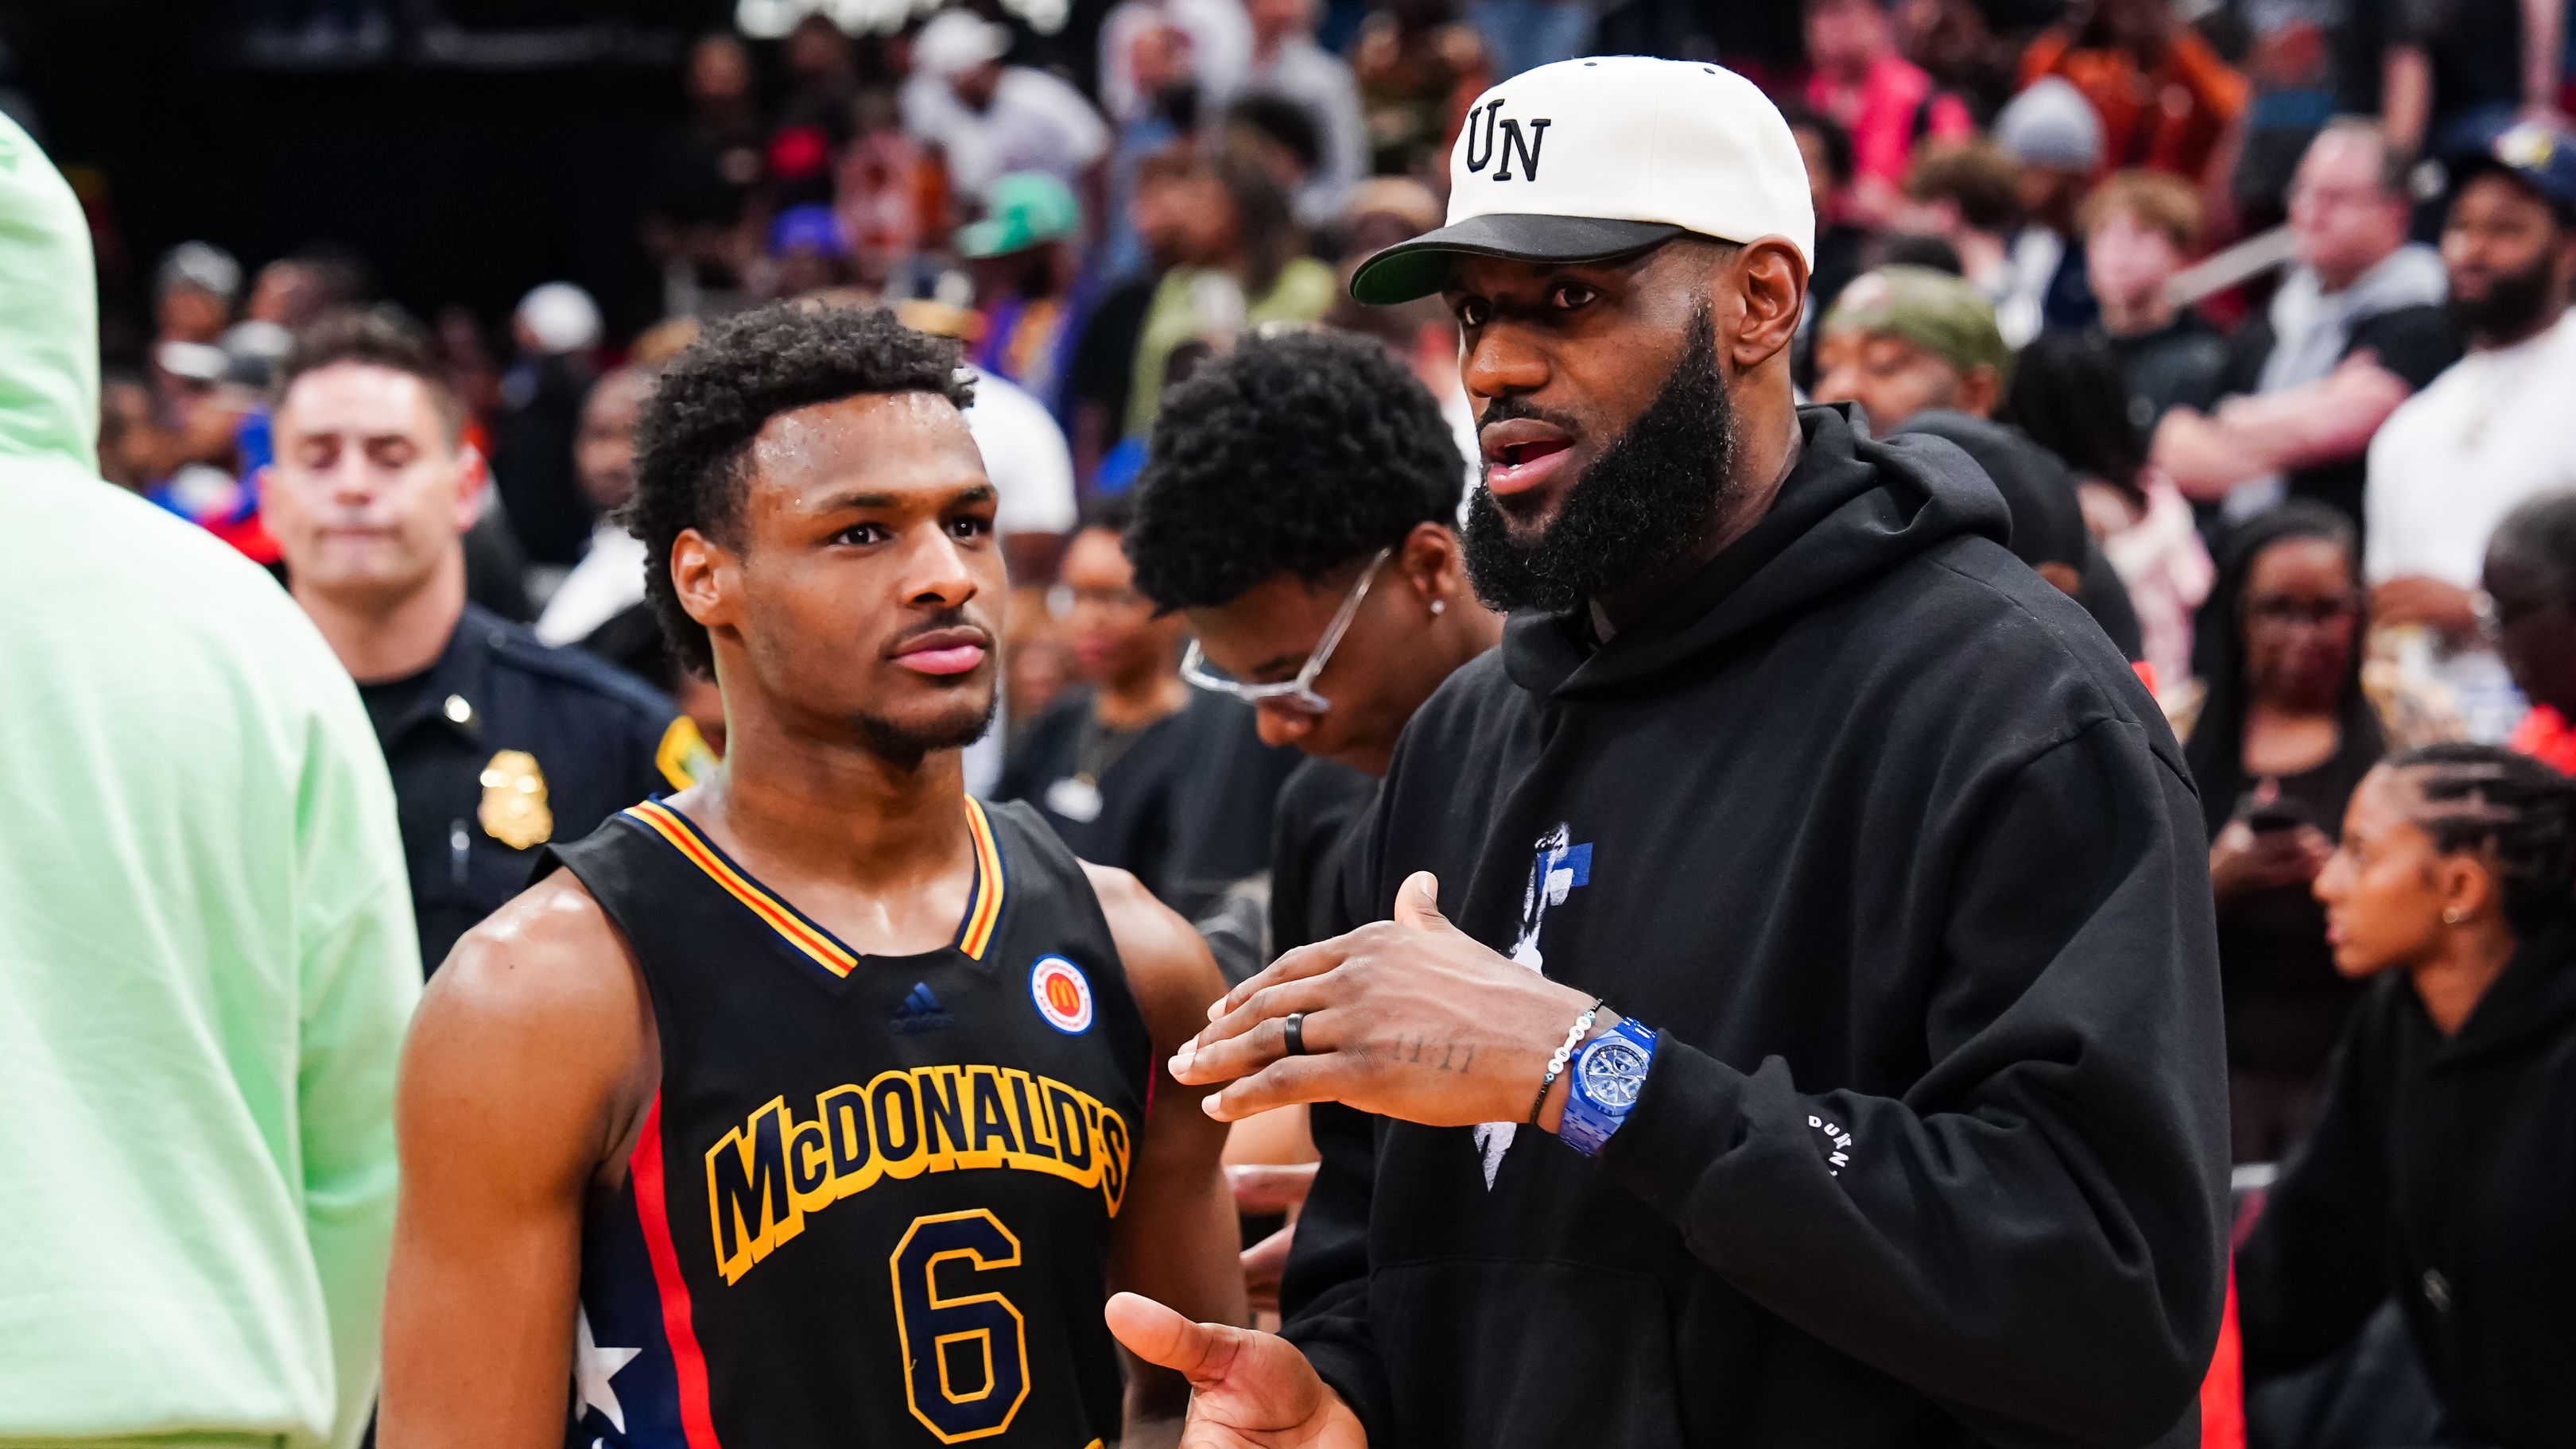 HOUSTON, TEXAS - MARCH 28: Bronny James #6 of the West team talks to Lebron James of the Los Angeles Lakers after the 2023 McDonald&#x27;s High School Boys All-American Game at Toyota Center on March 28, 2023 in Houston, Texas. (Photo by Alex Bierens de Haan/Getty Images)